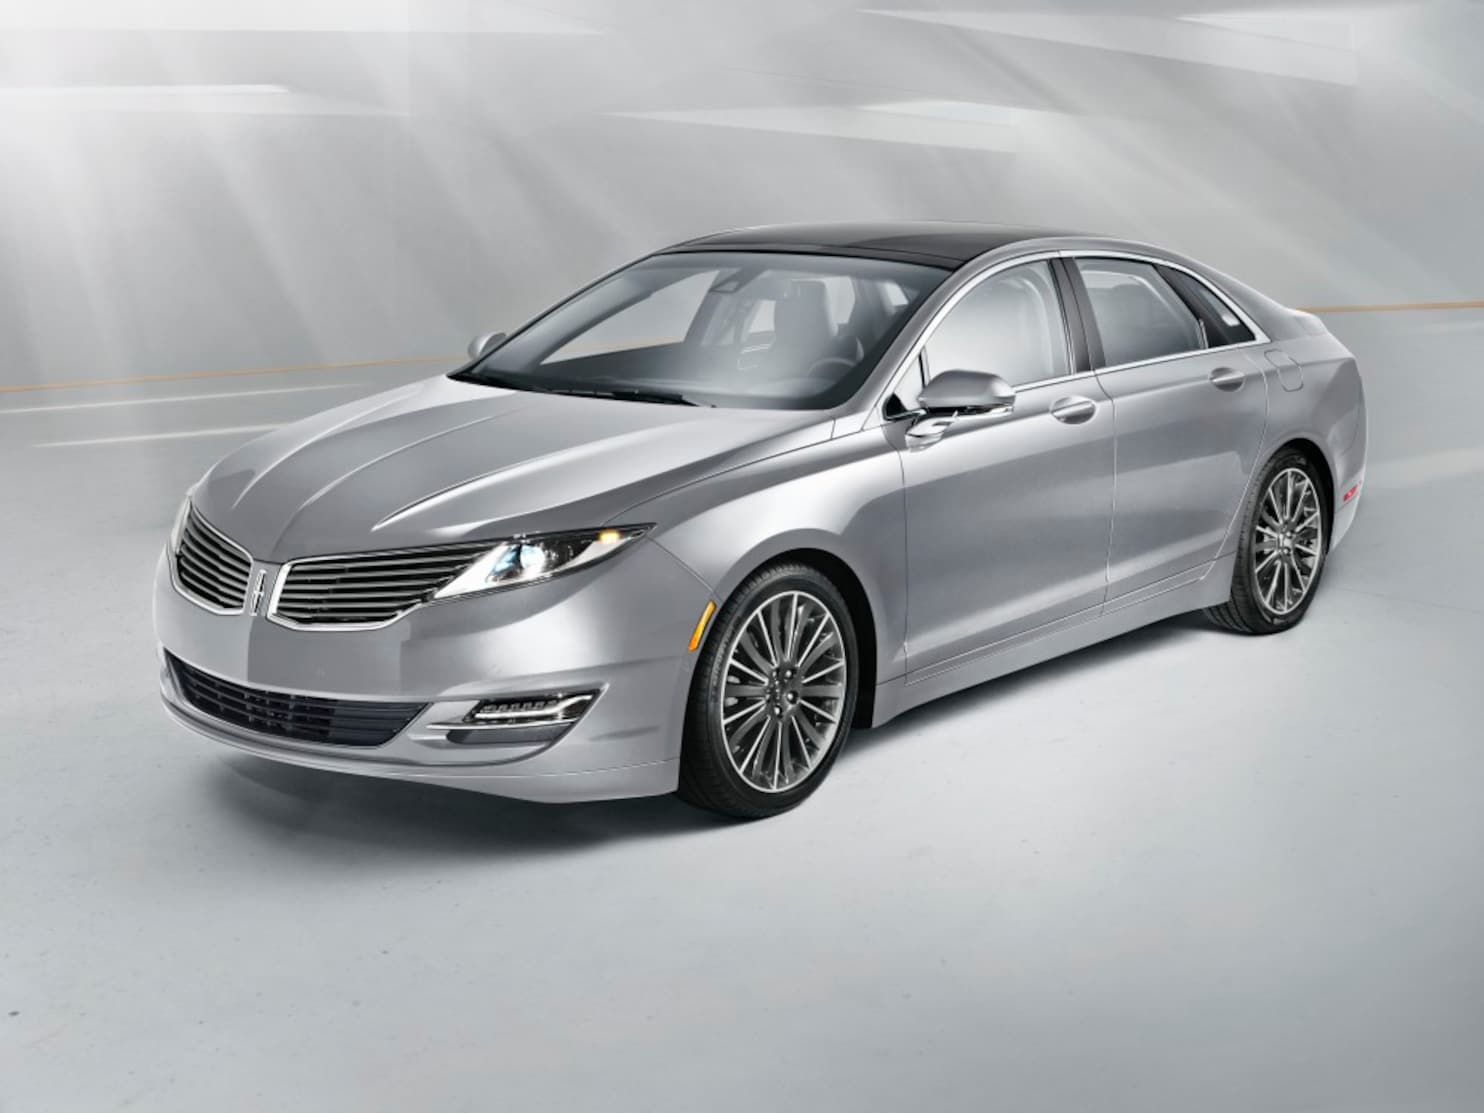 On Wheels: Lincoln MKZ and the luxury of common sense - The Washington Post